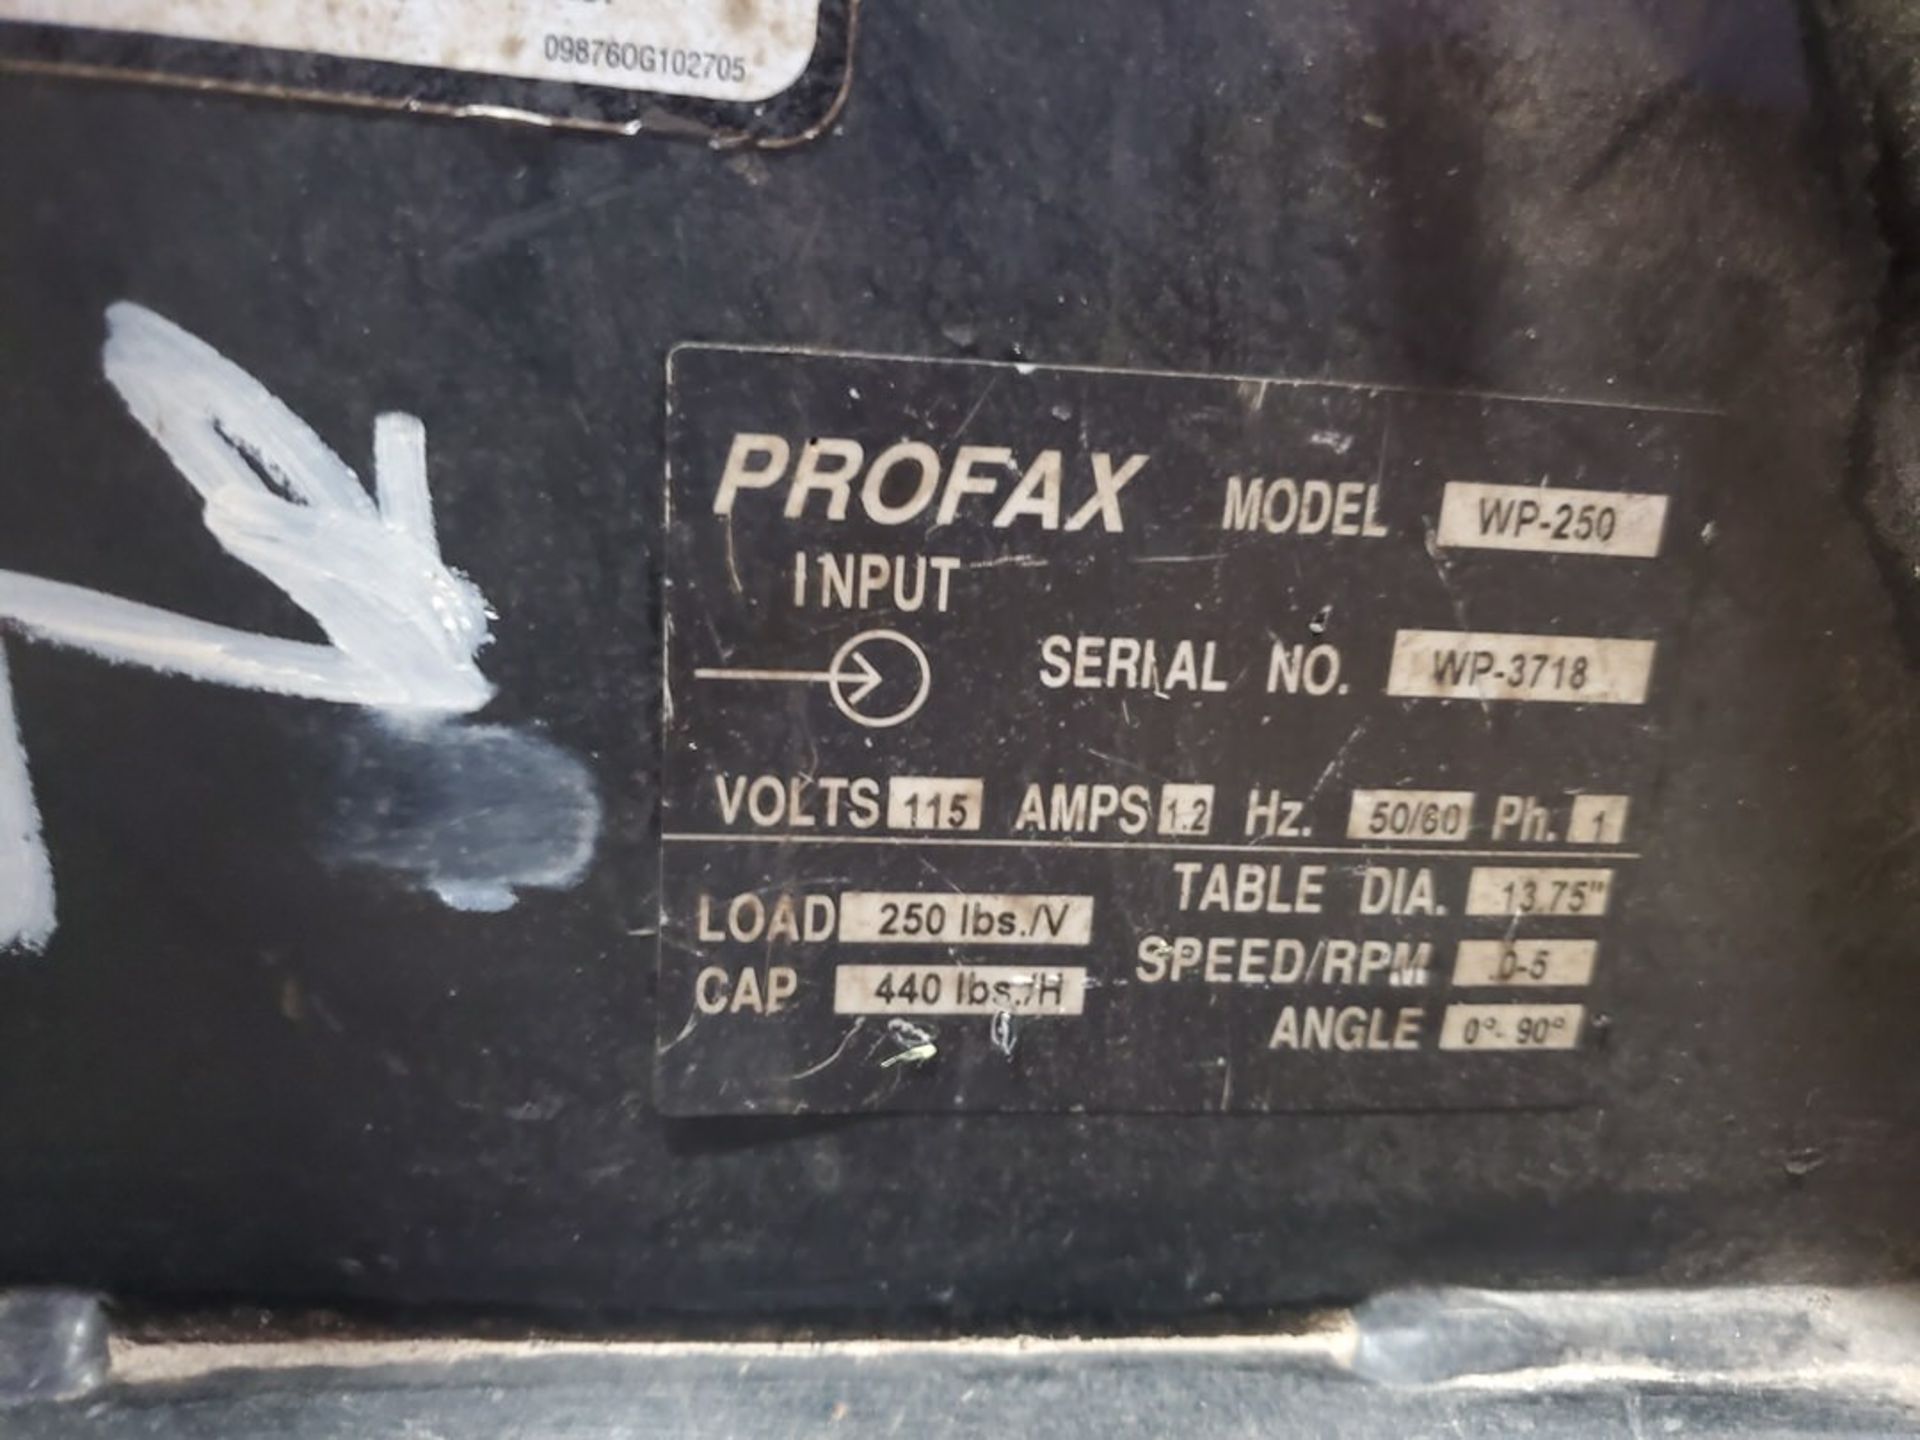 Profax WP-250 Positioner 115V, 1PH, 50/60HZ, Table Dia: 13.75", Cap: 440lbs, Speed/RPM: 0-5; W/ Foot - Image 7 of 7